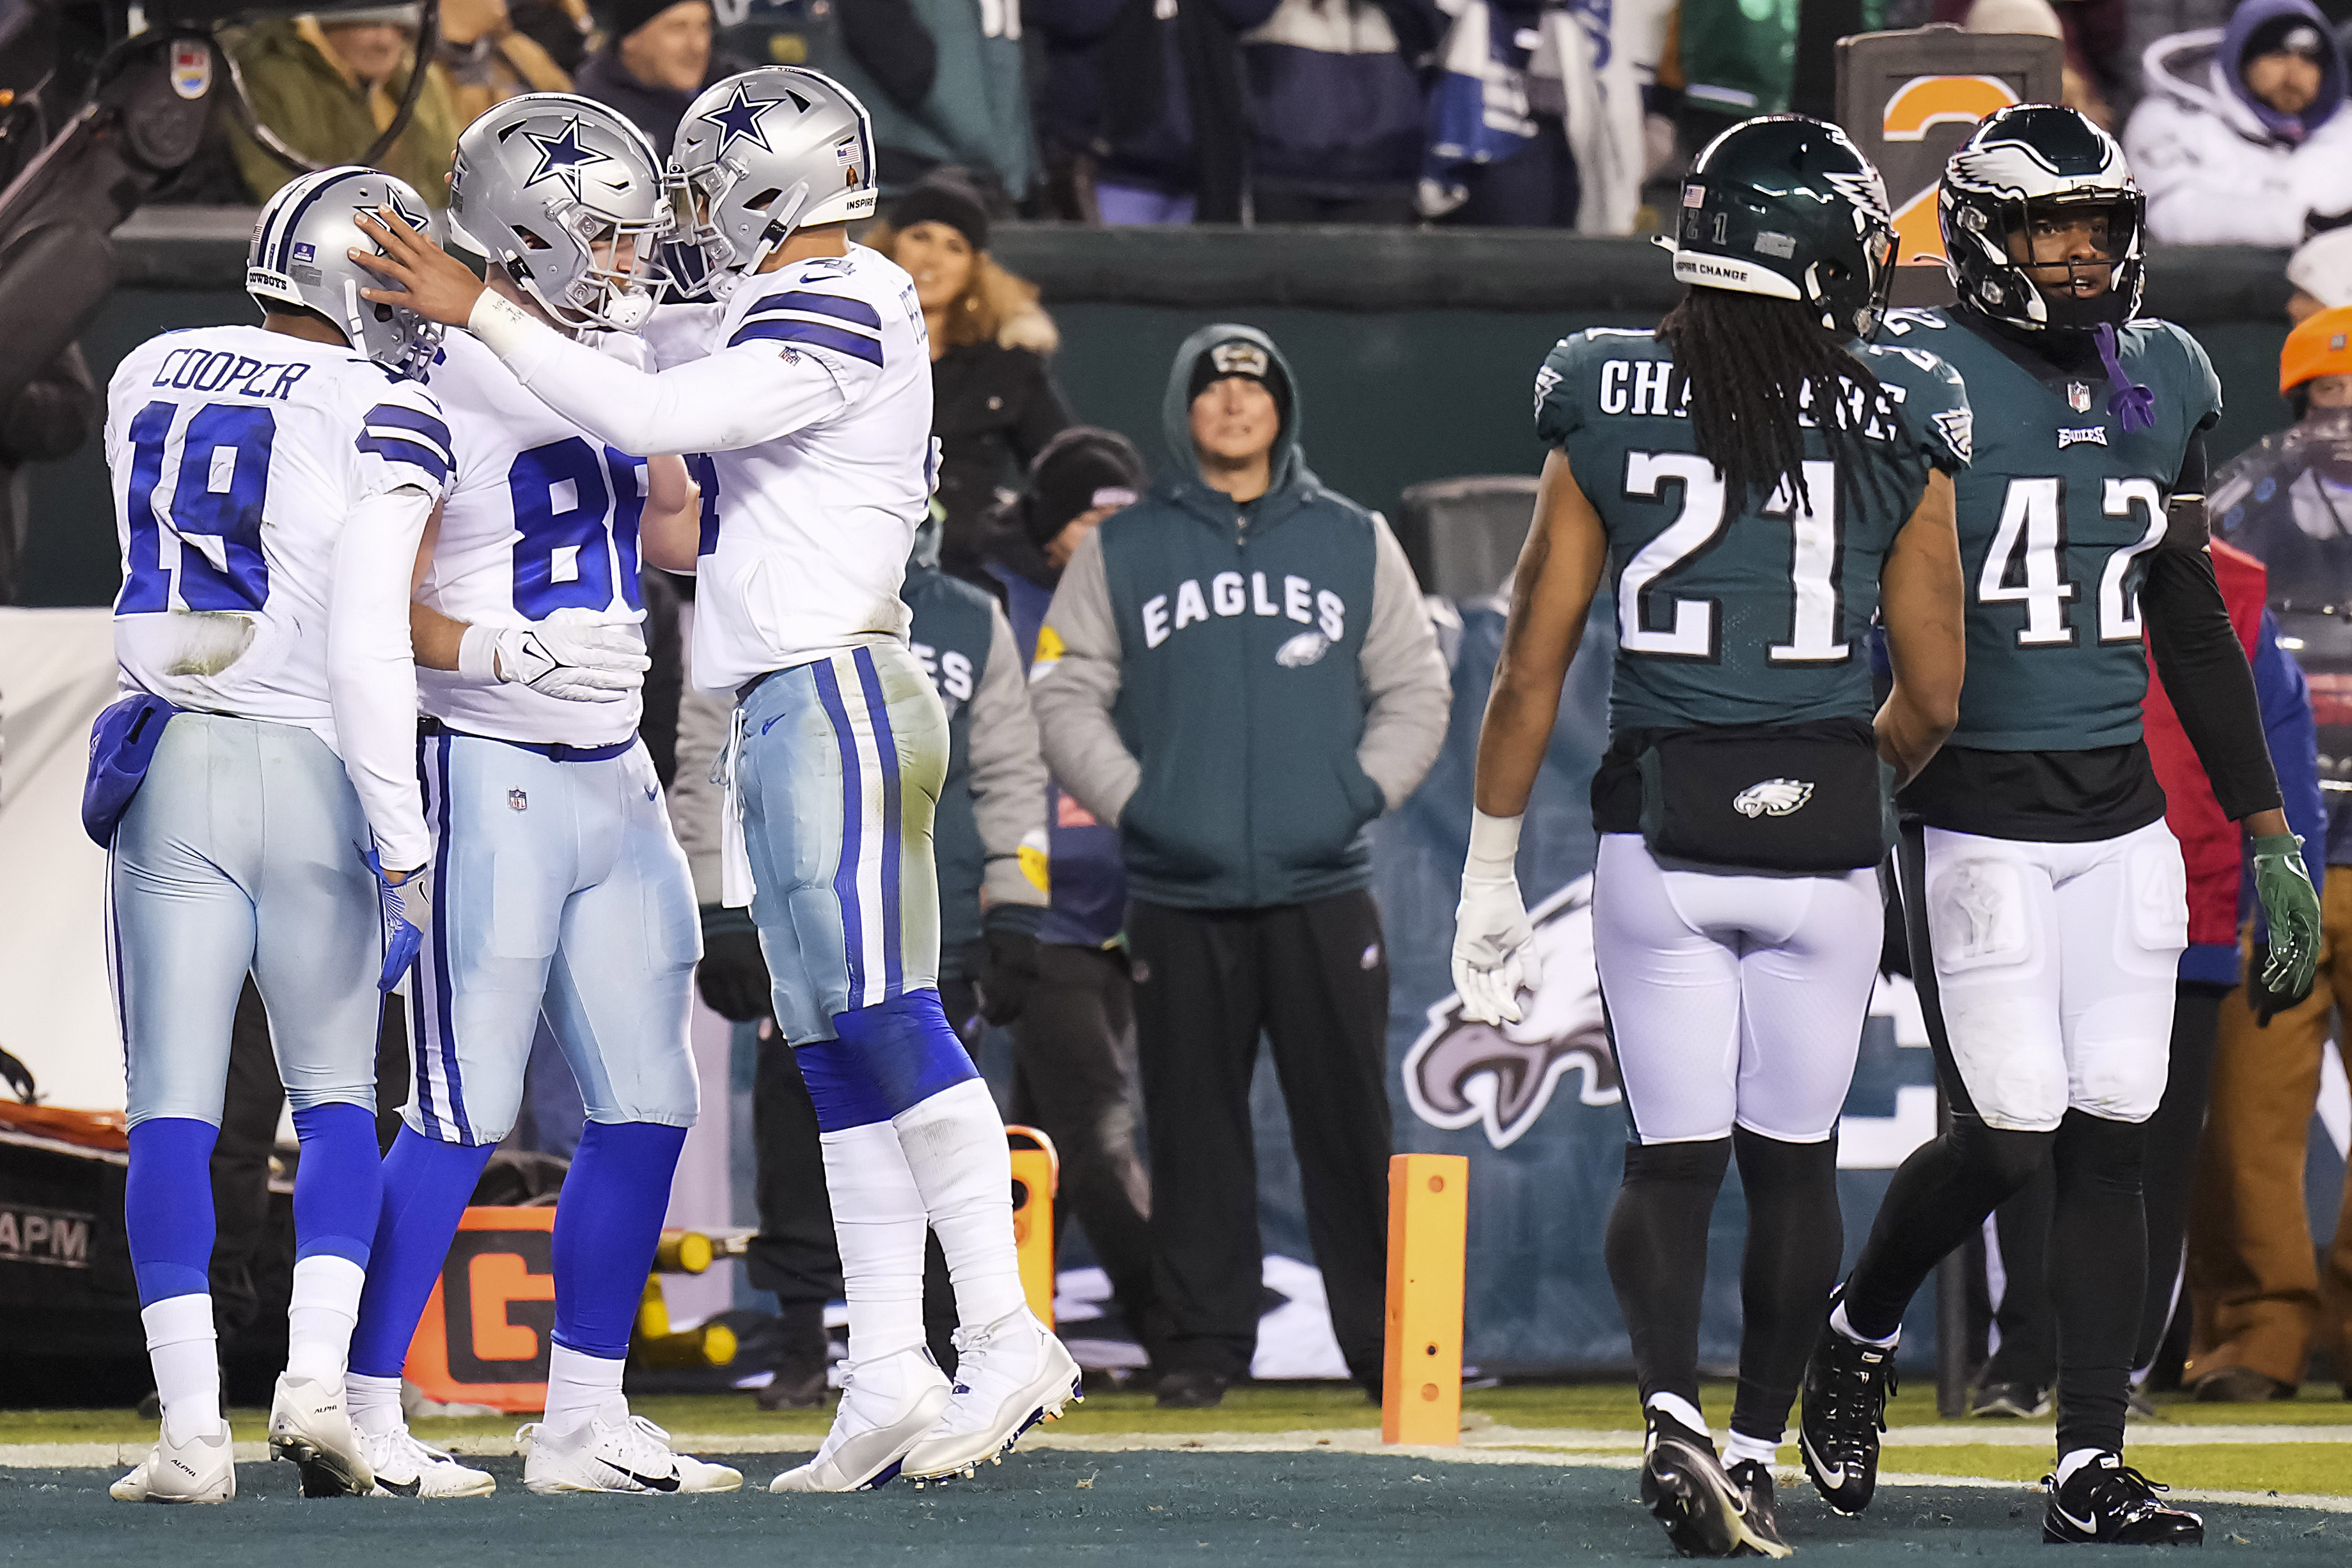 5 takeaways from Cowboys-Eagles: Dallas sweeps NFC East with